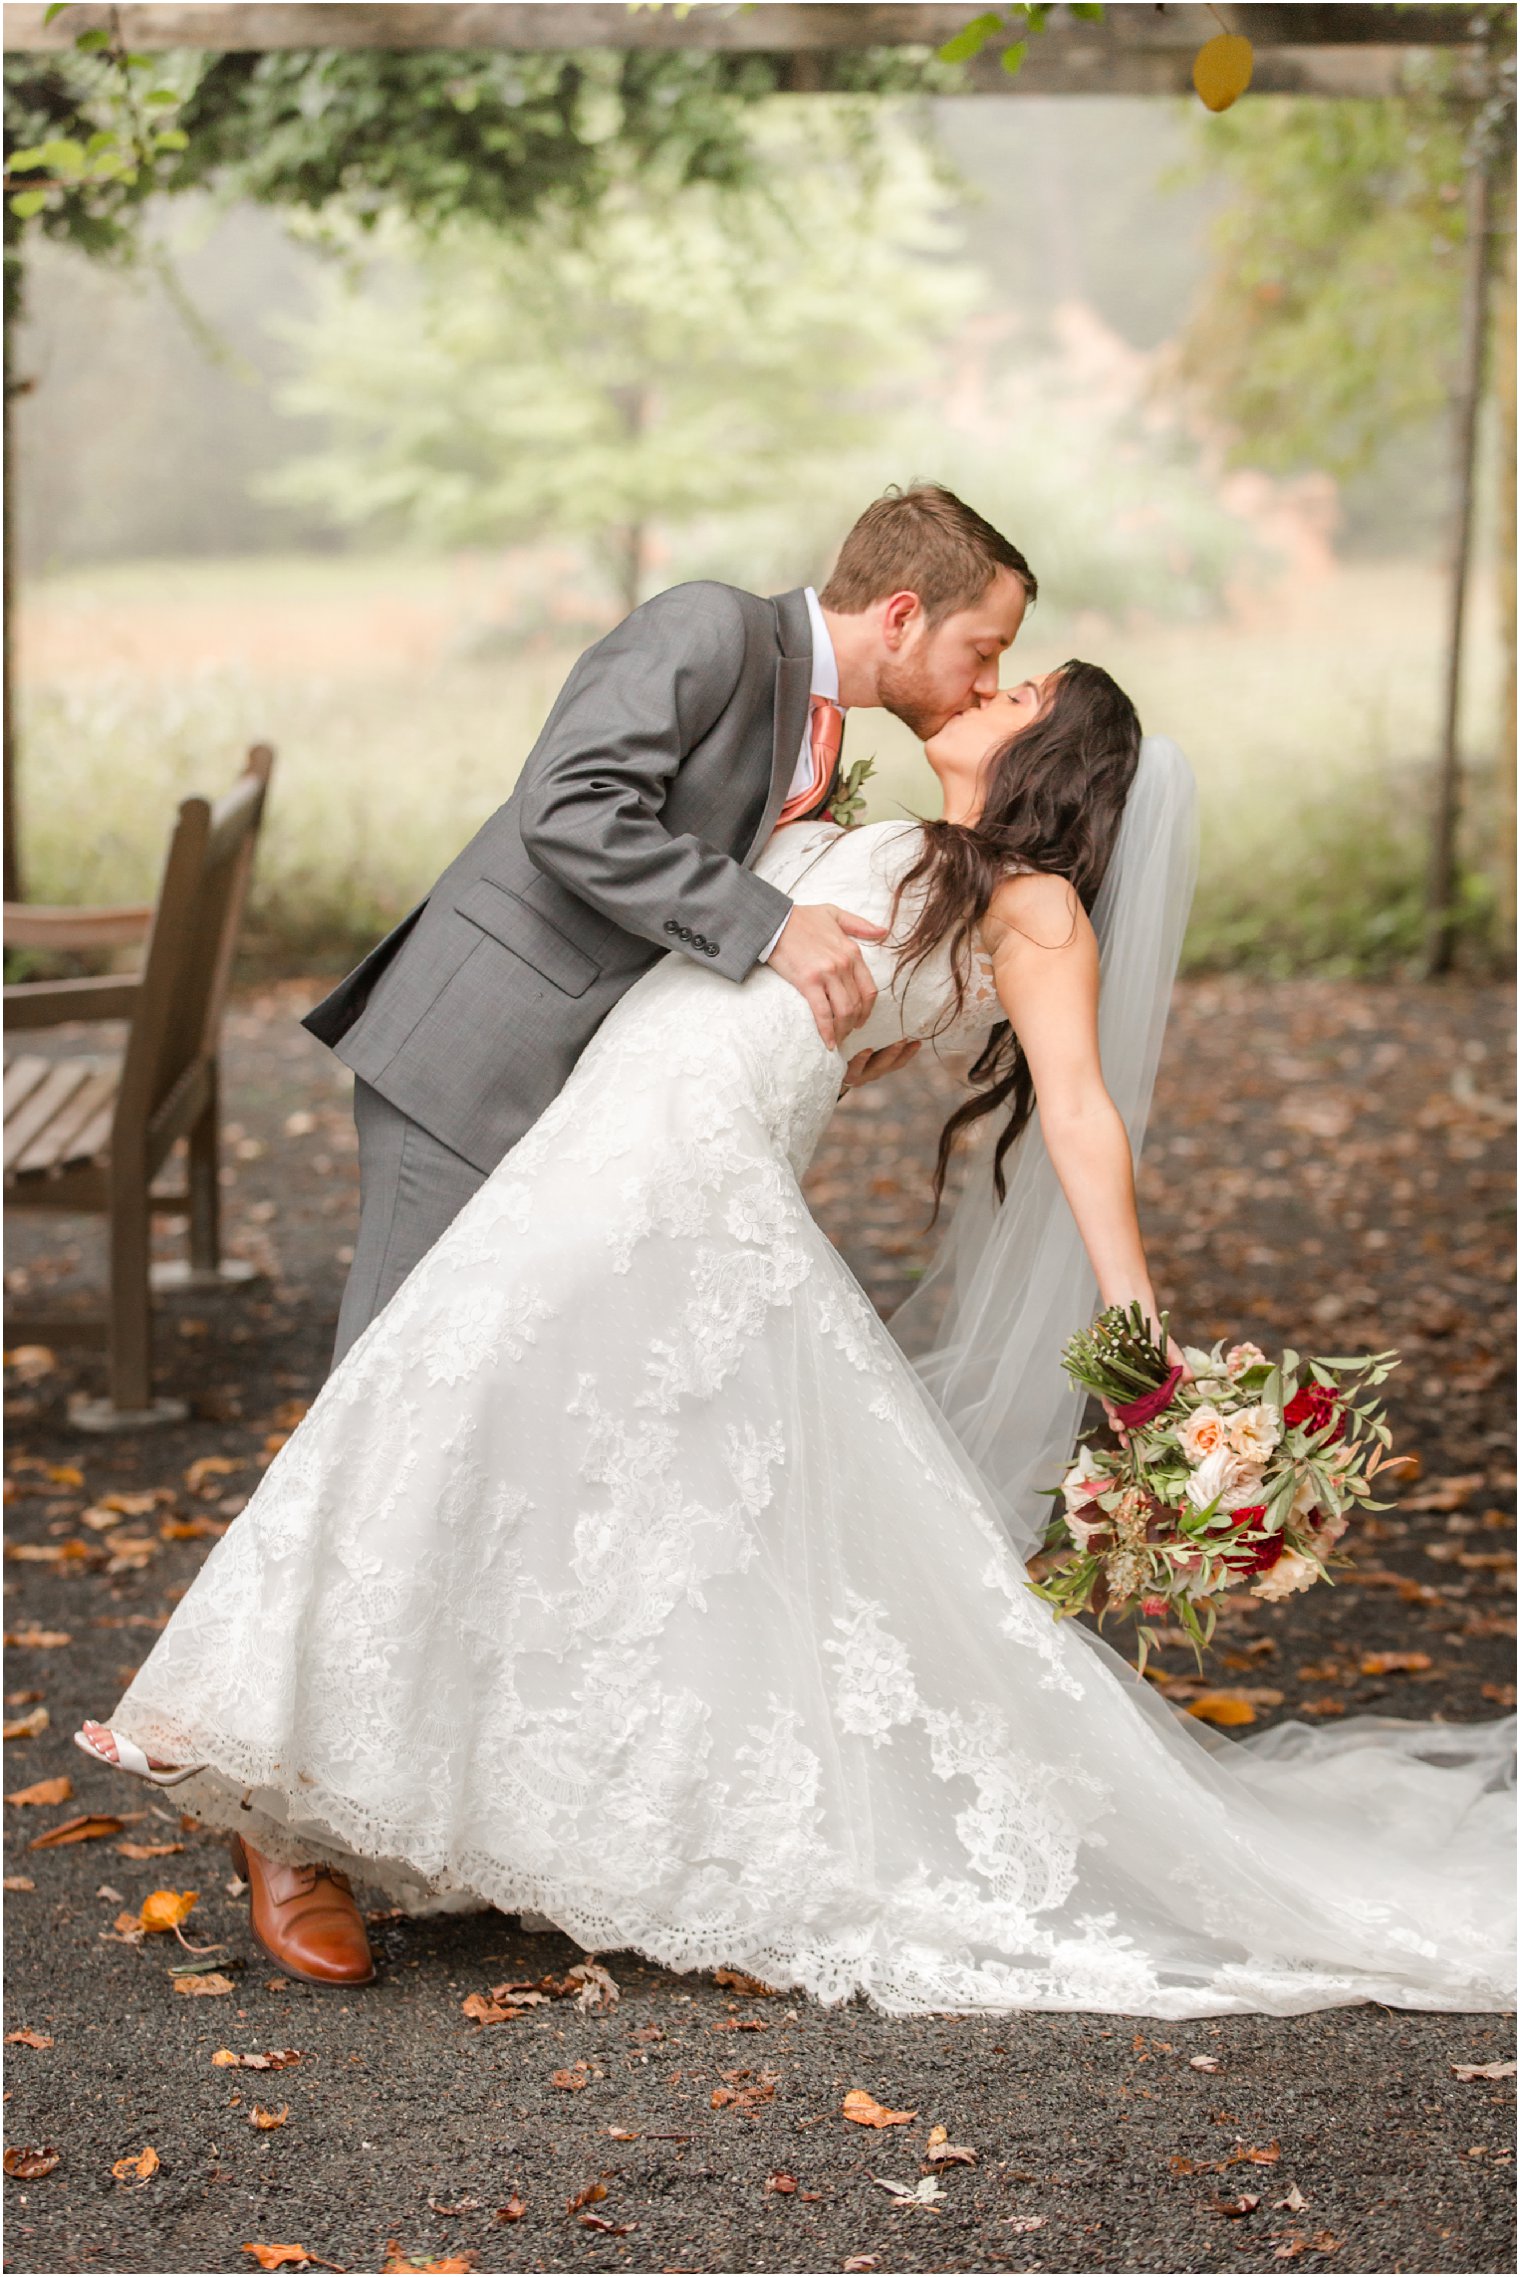 romantic wedding day portrait at Olde Mill Inn photographed by Idalia Photography